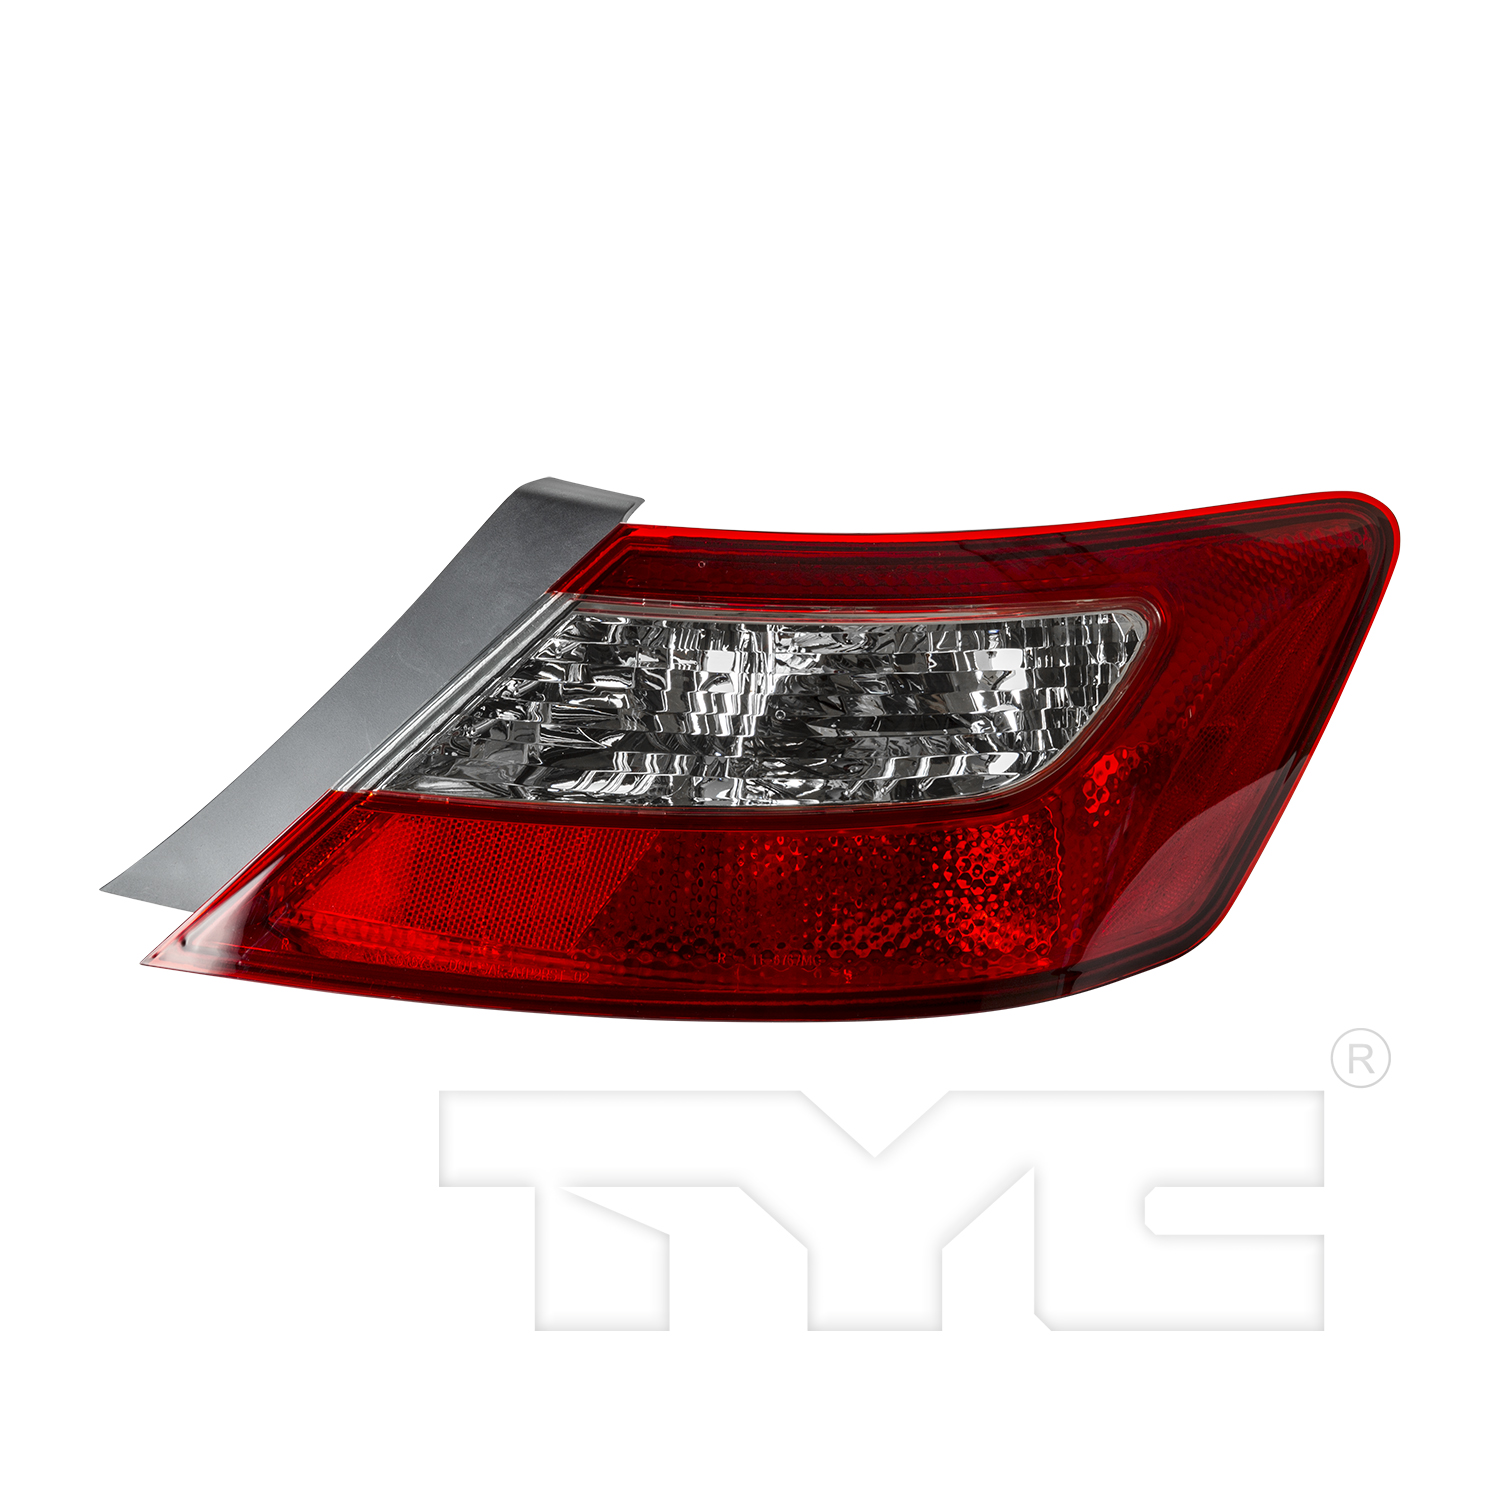 Aftermarket TAILLIGHTS for HONDA - CIVIC, CIVIC,09-11,RT Taillamp lens/housing